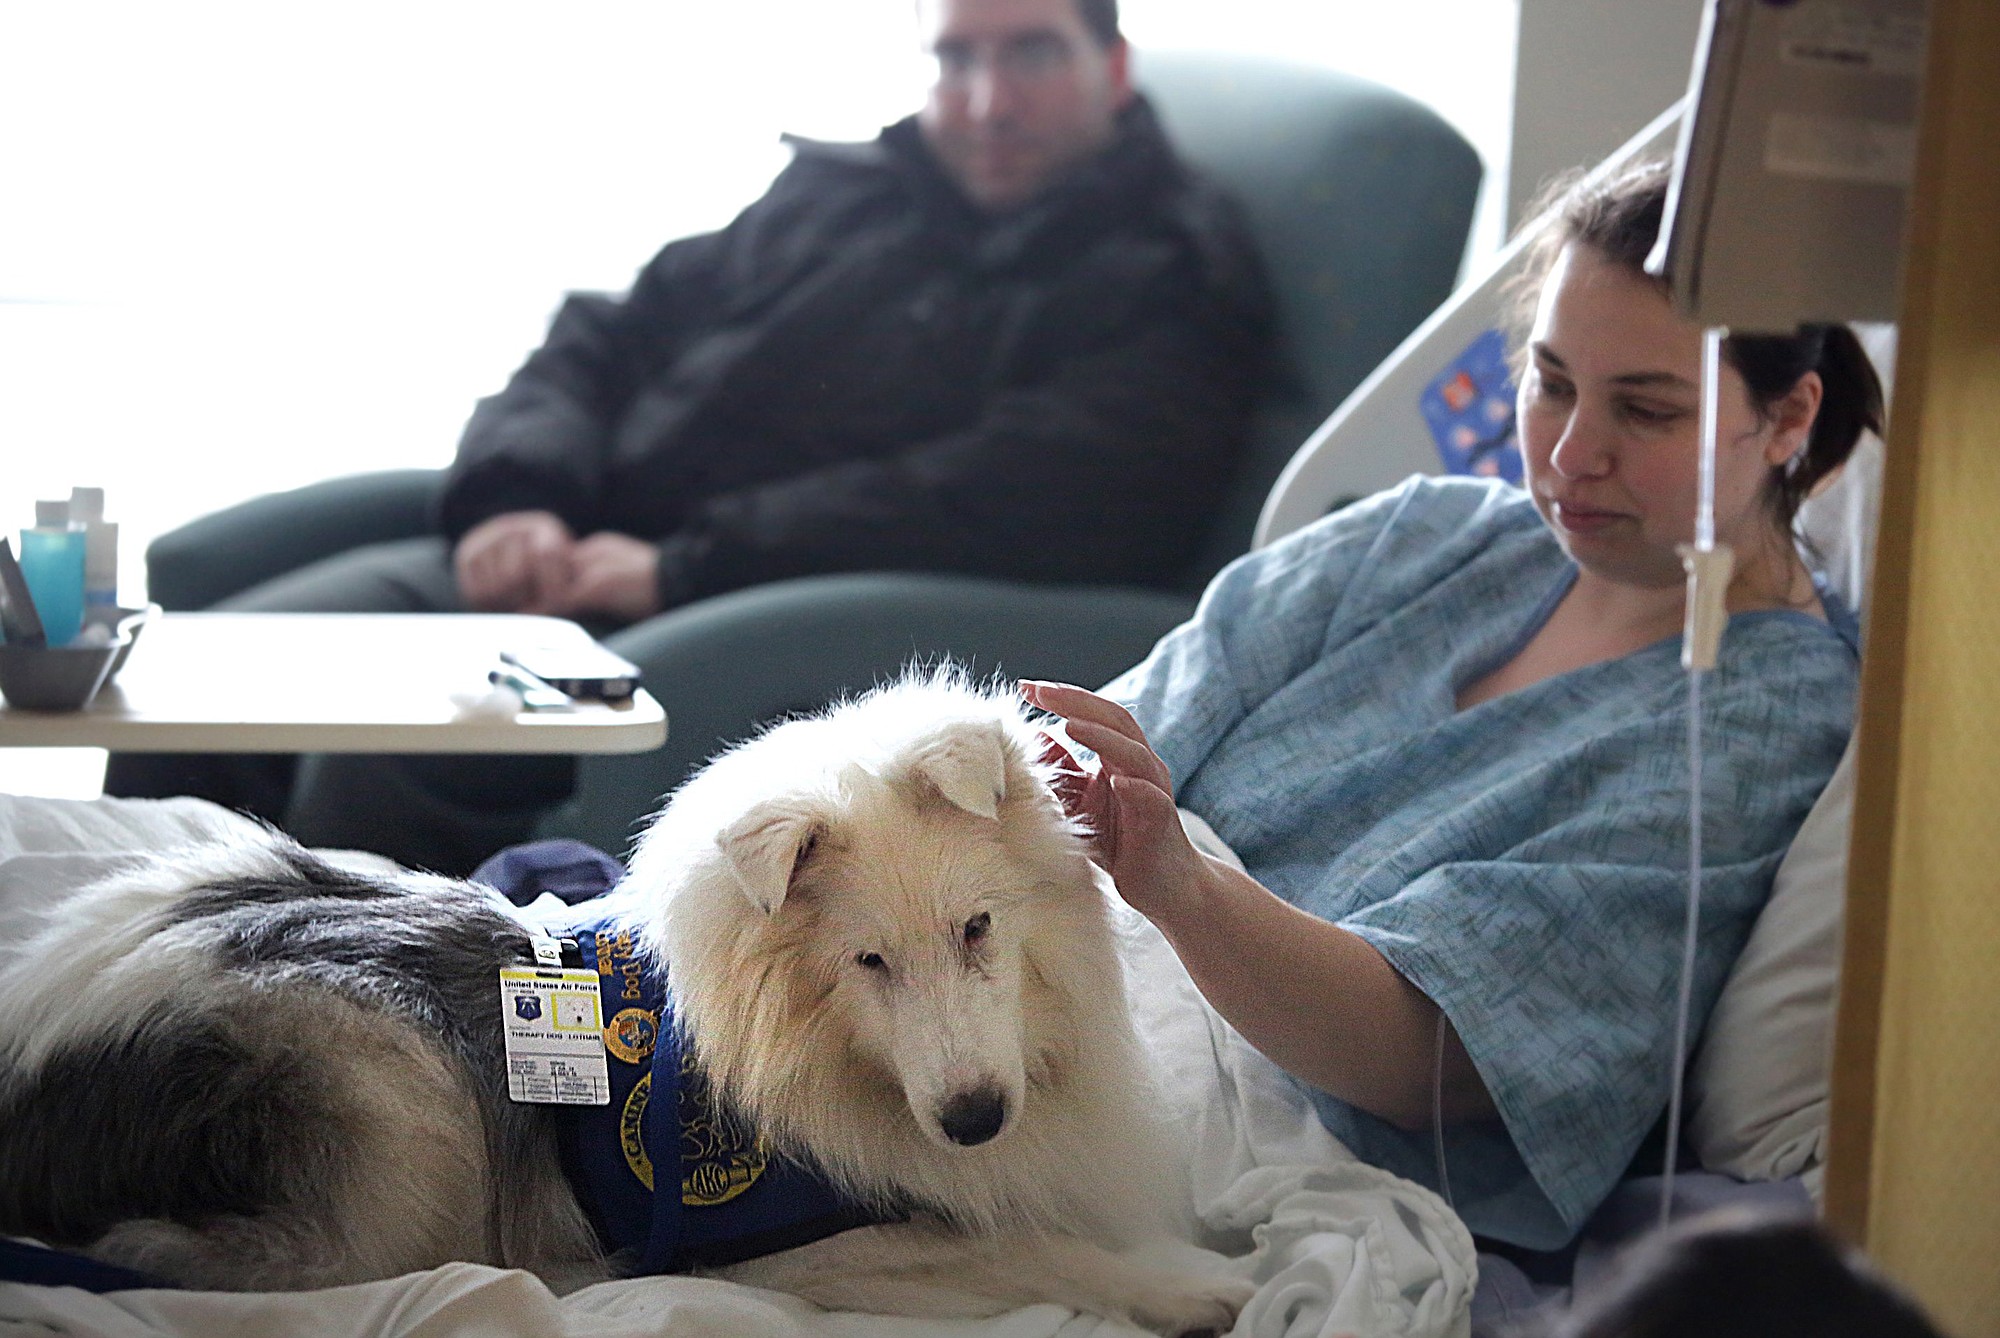 Lothair, a deaf therapy dog that owner Melanie Paul takes to Langley AFB weekly, is petted by patient Rebecca Bennett-Jordan as Steven Jordan watches in Hampton, Va.